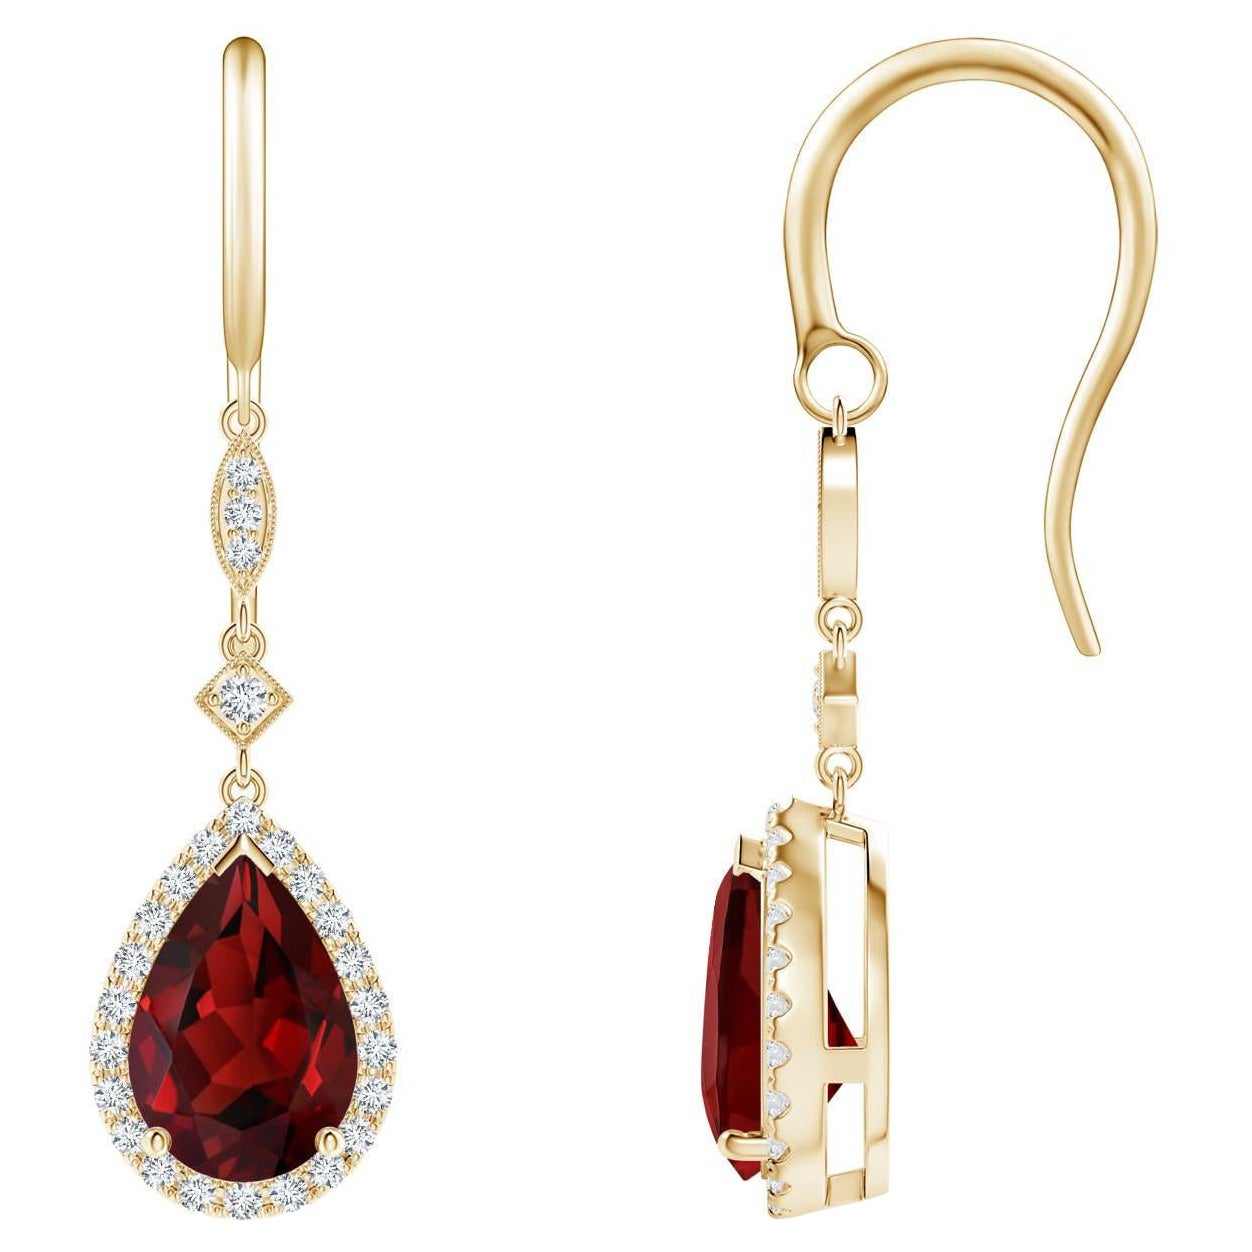 Natural Pear-Shaped 3ct Garnet Drop Earrings with Diamond in 14K Yellow Gold For Sale